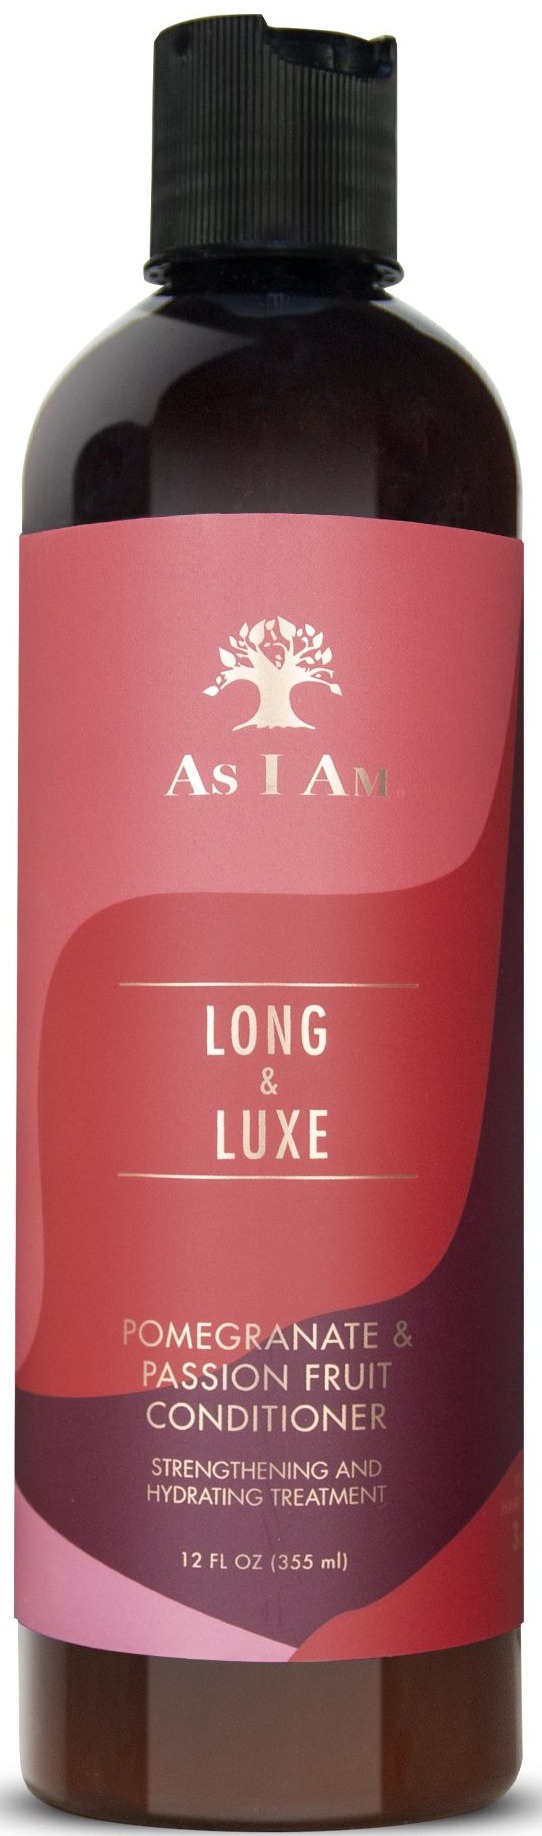 As I Am Long & Luxe Conditioner